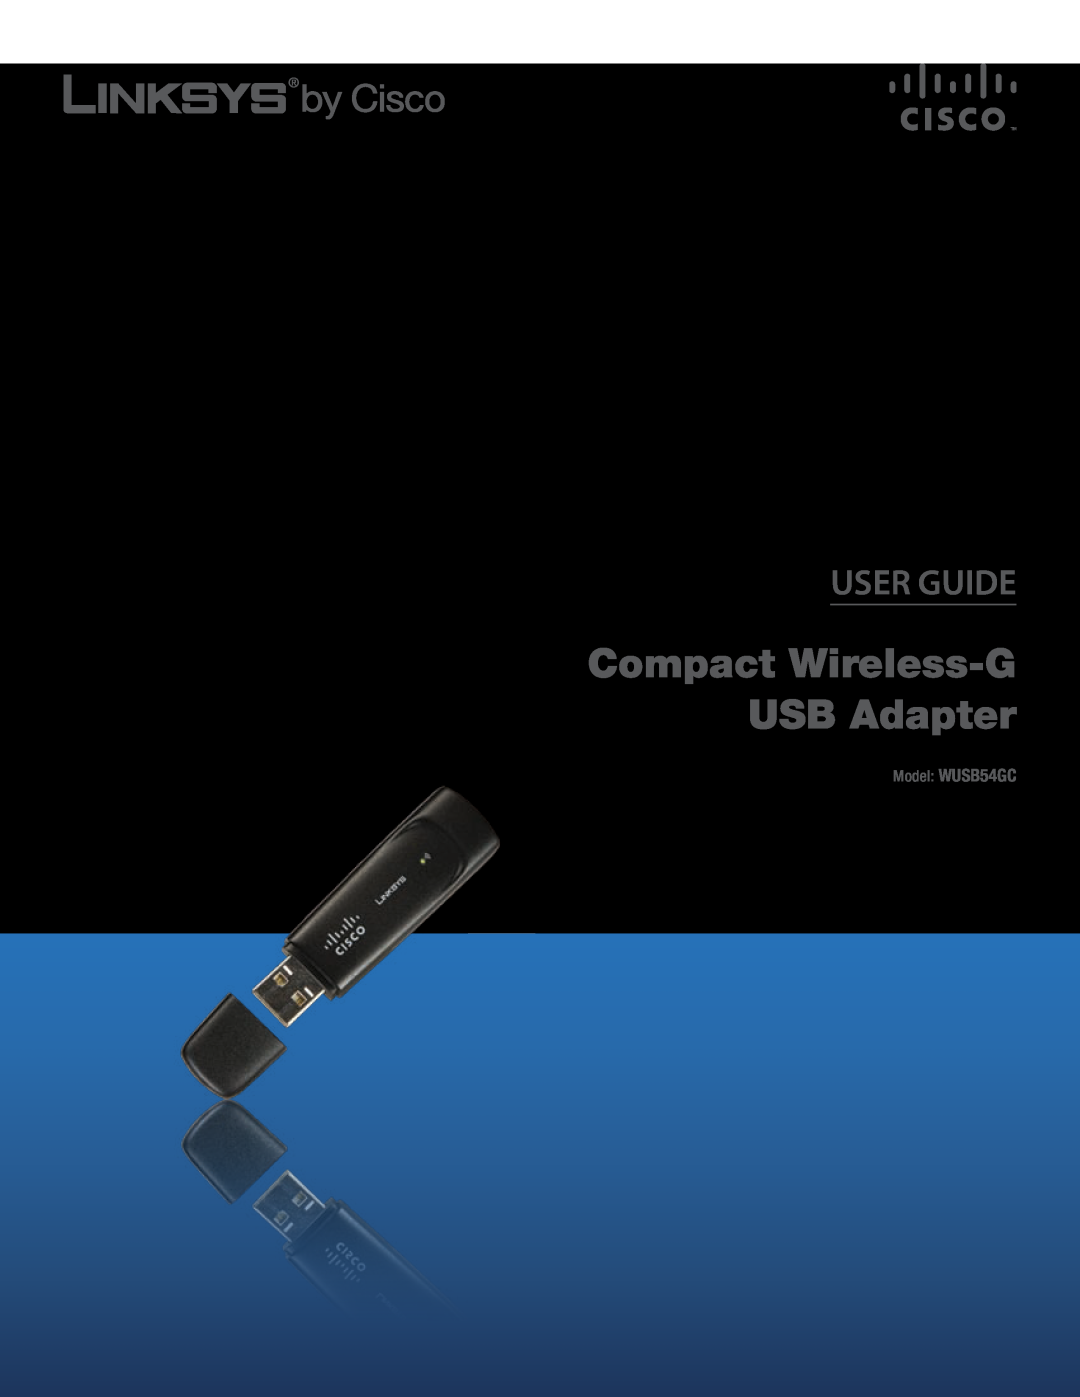 Cisco Systems manual Compact Wireless-G USB Adapter, User Guide, Model WUSB54GC EU 